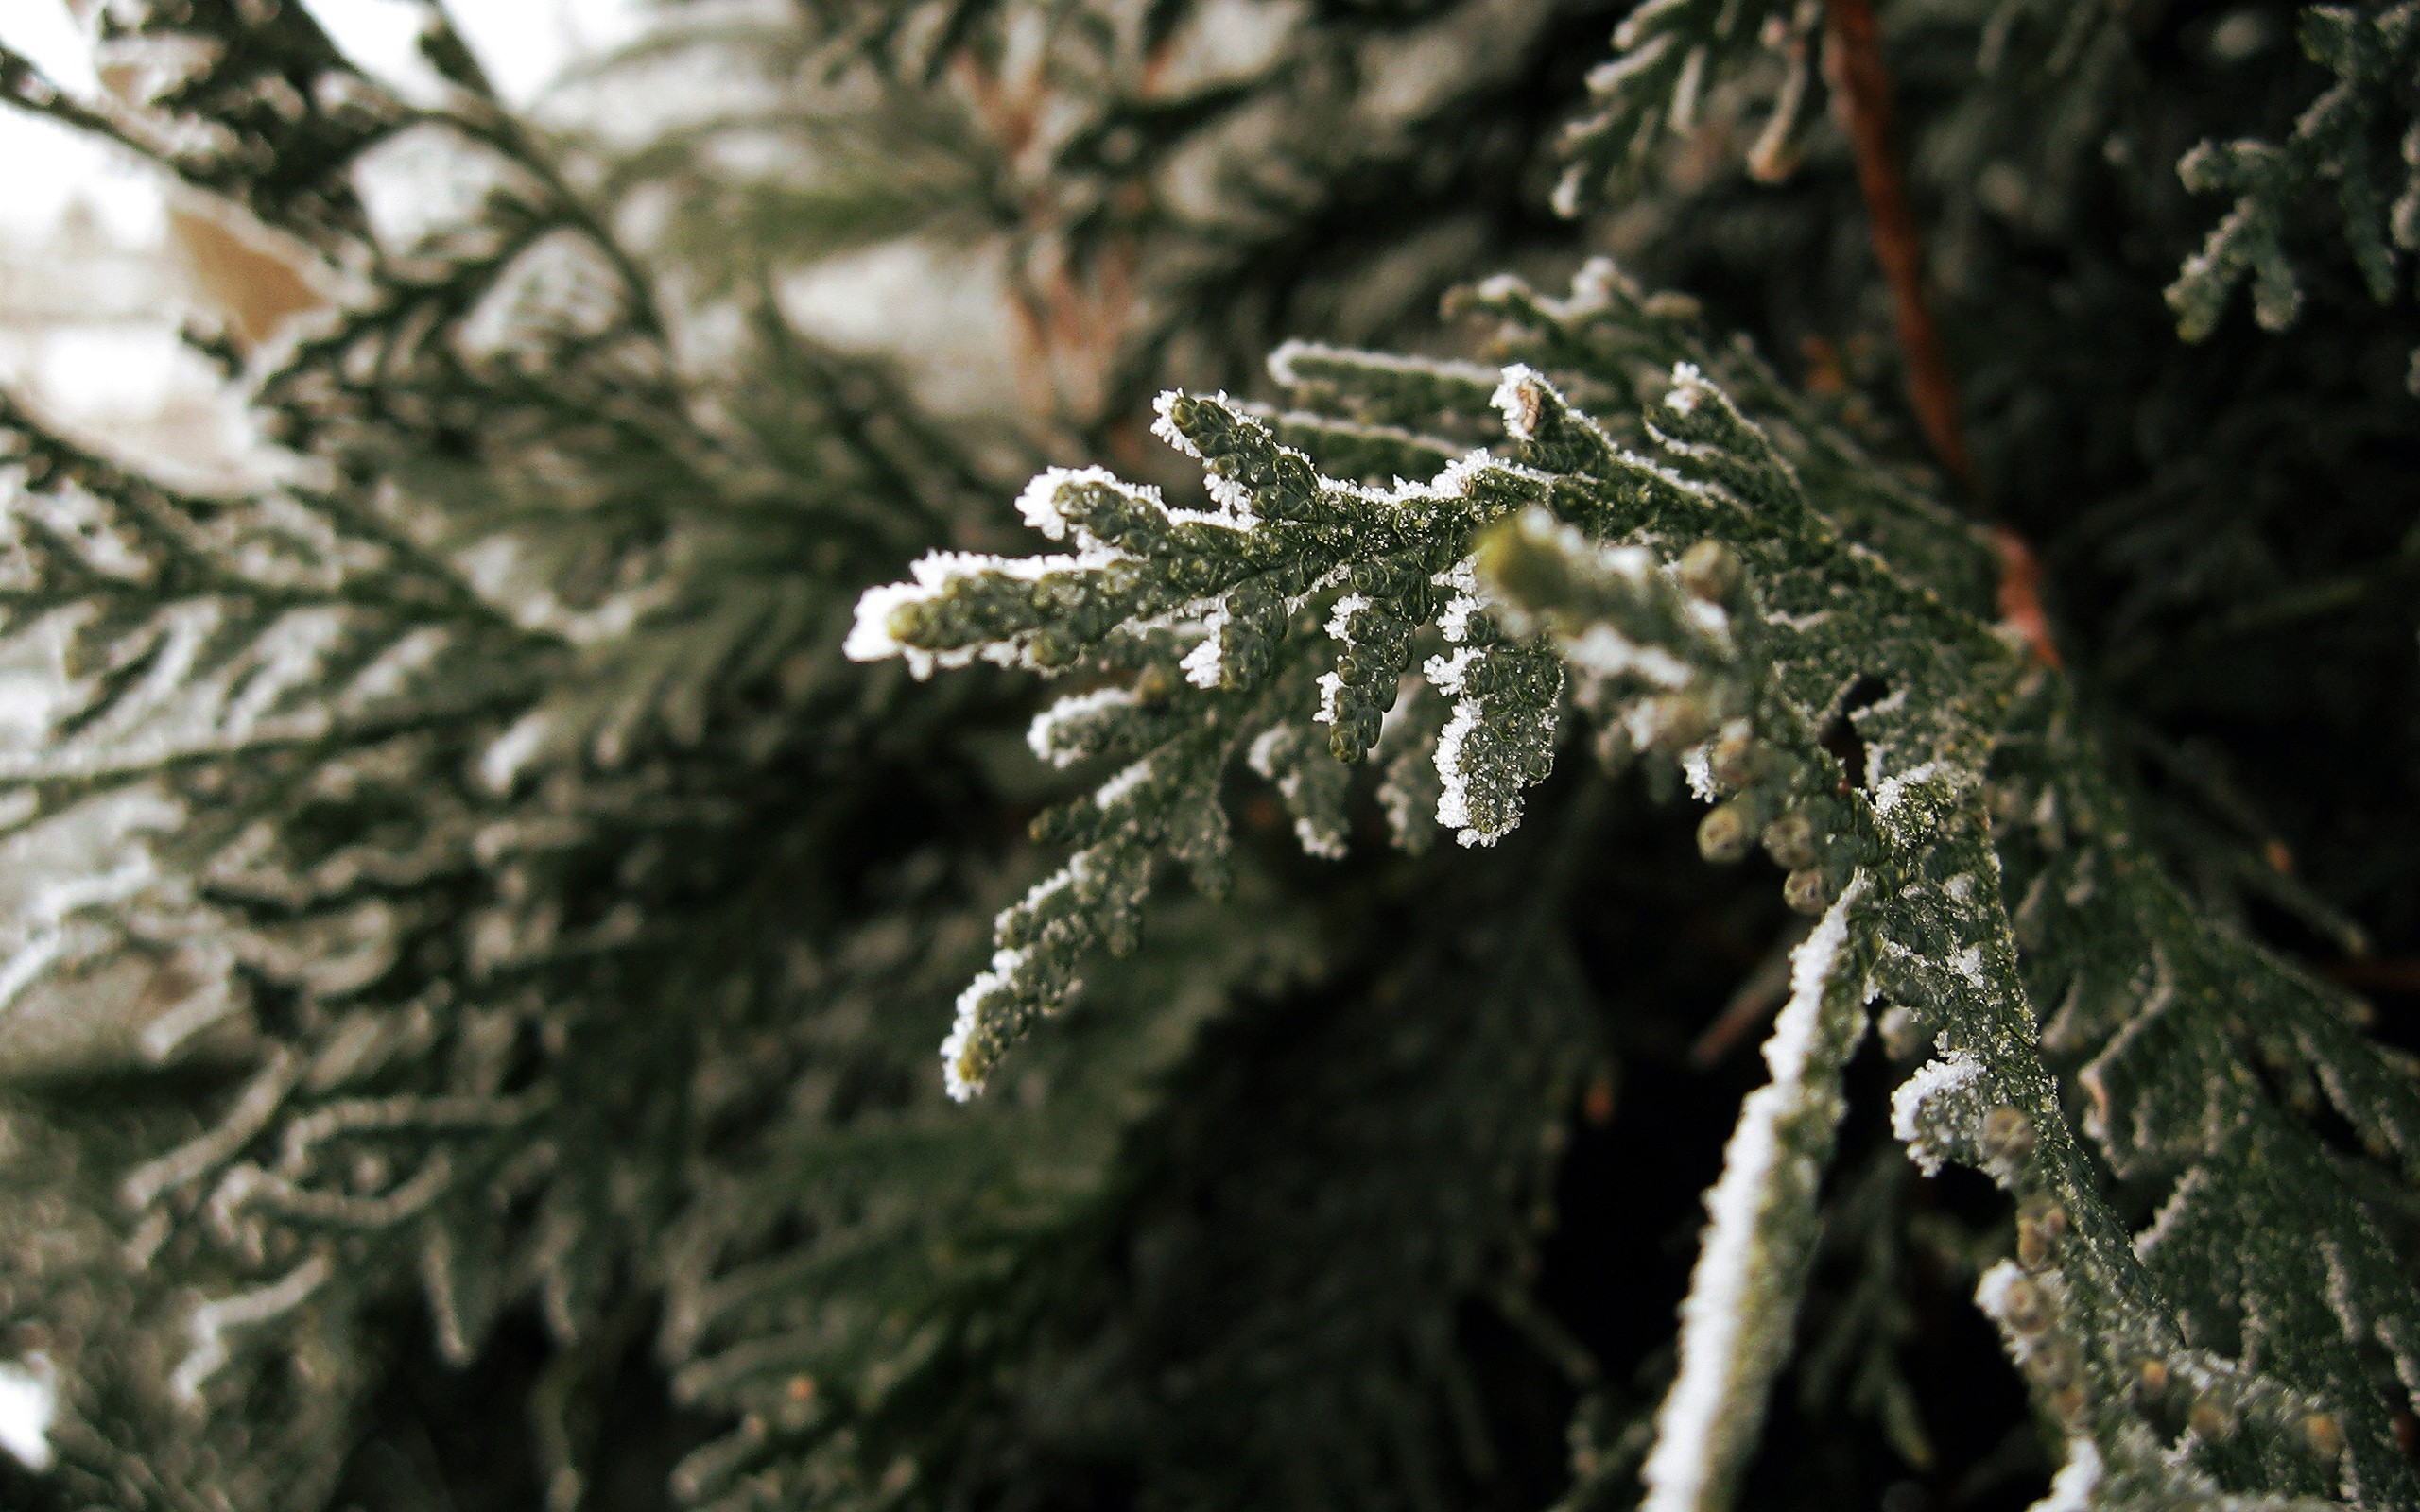 General 2560x1600 nature macro frost plants branch winter cold outdoors